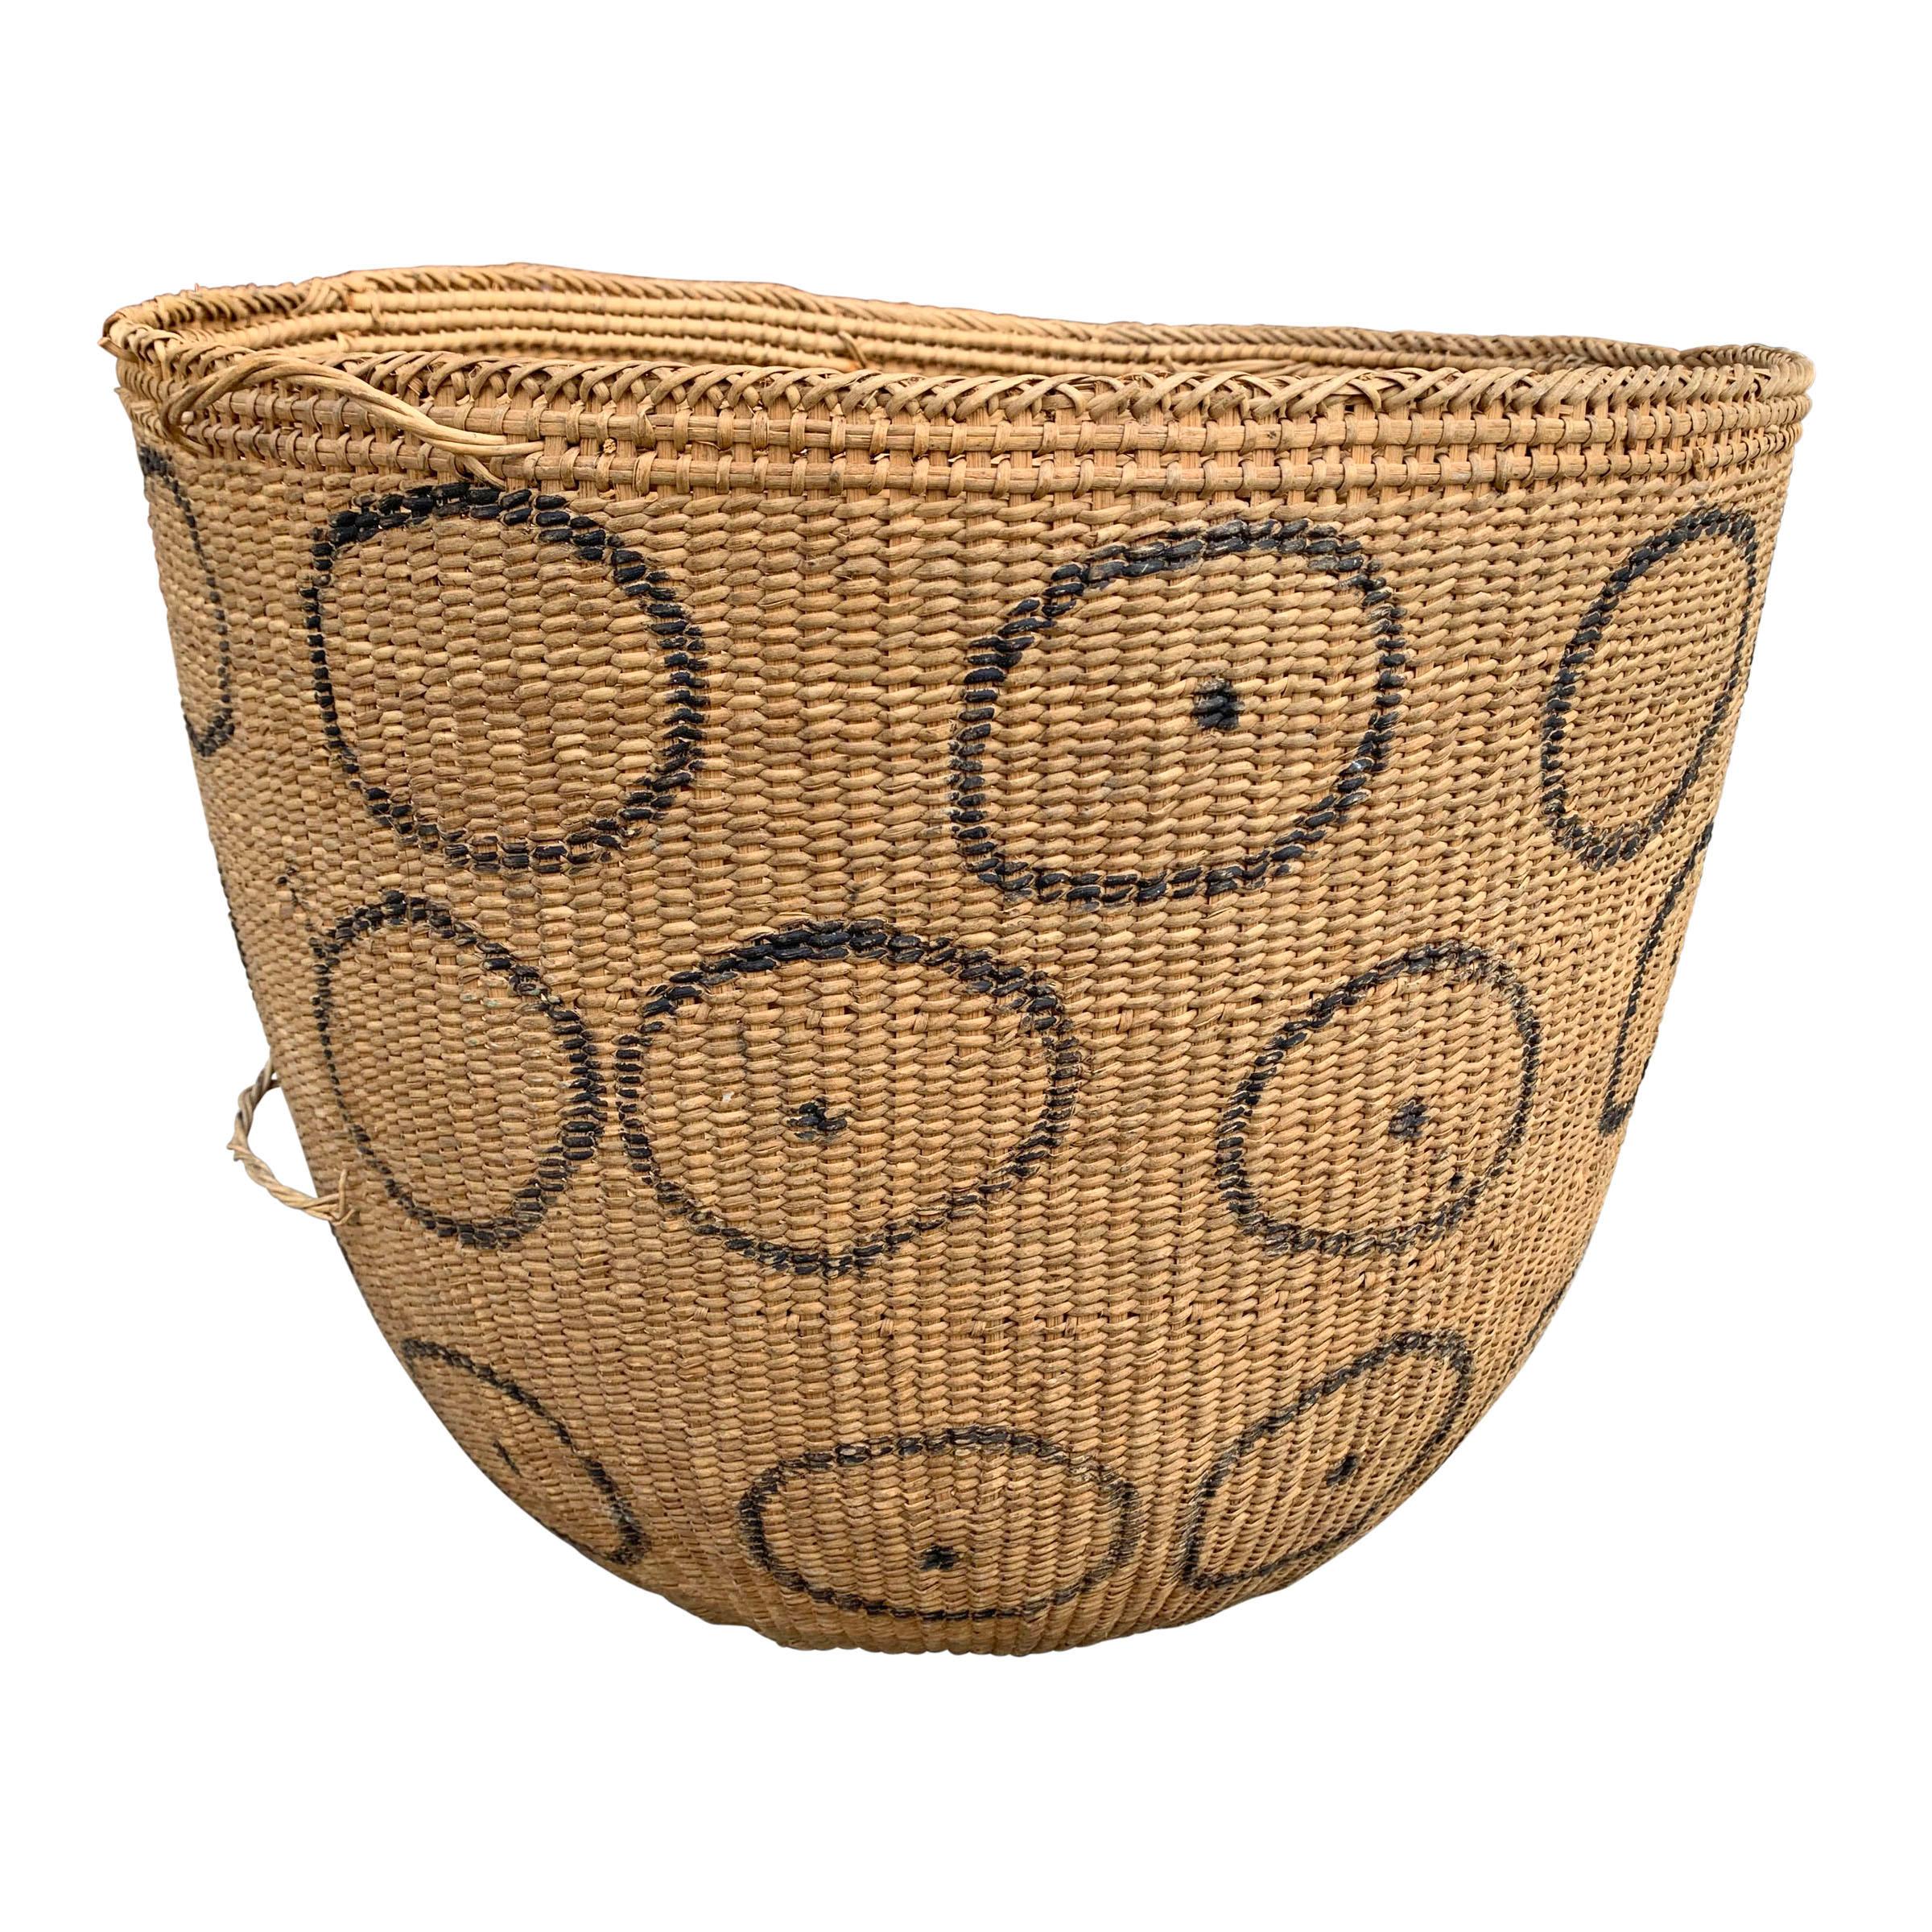 A 20th century Yanomami gathering basket decorated with charcoal drawn circles with dots on the exterior. This basket is tightly handwoven of natural fibers with several inner rings for stability. Straps are usually tied around the small loops